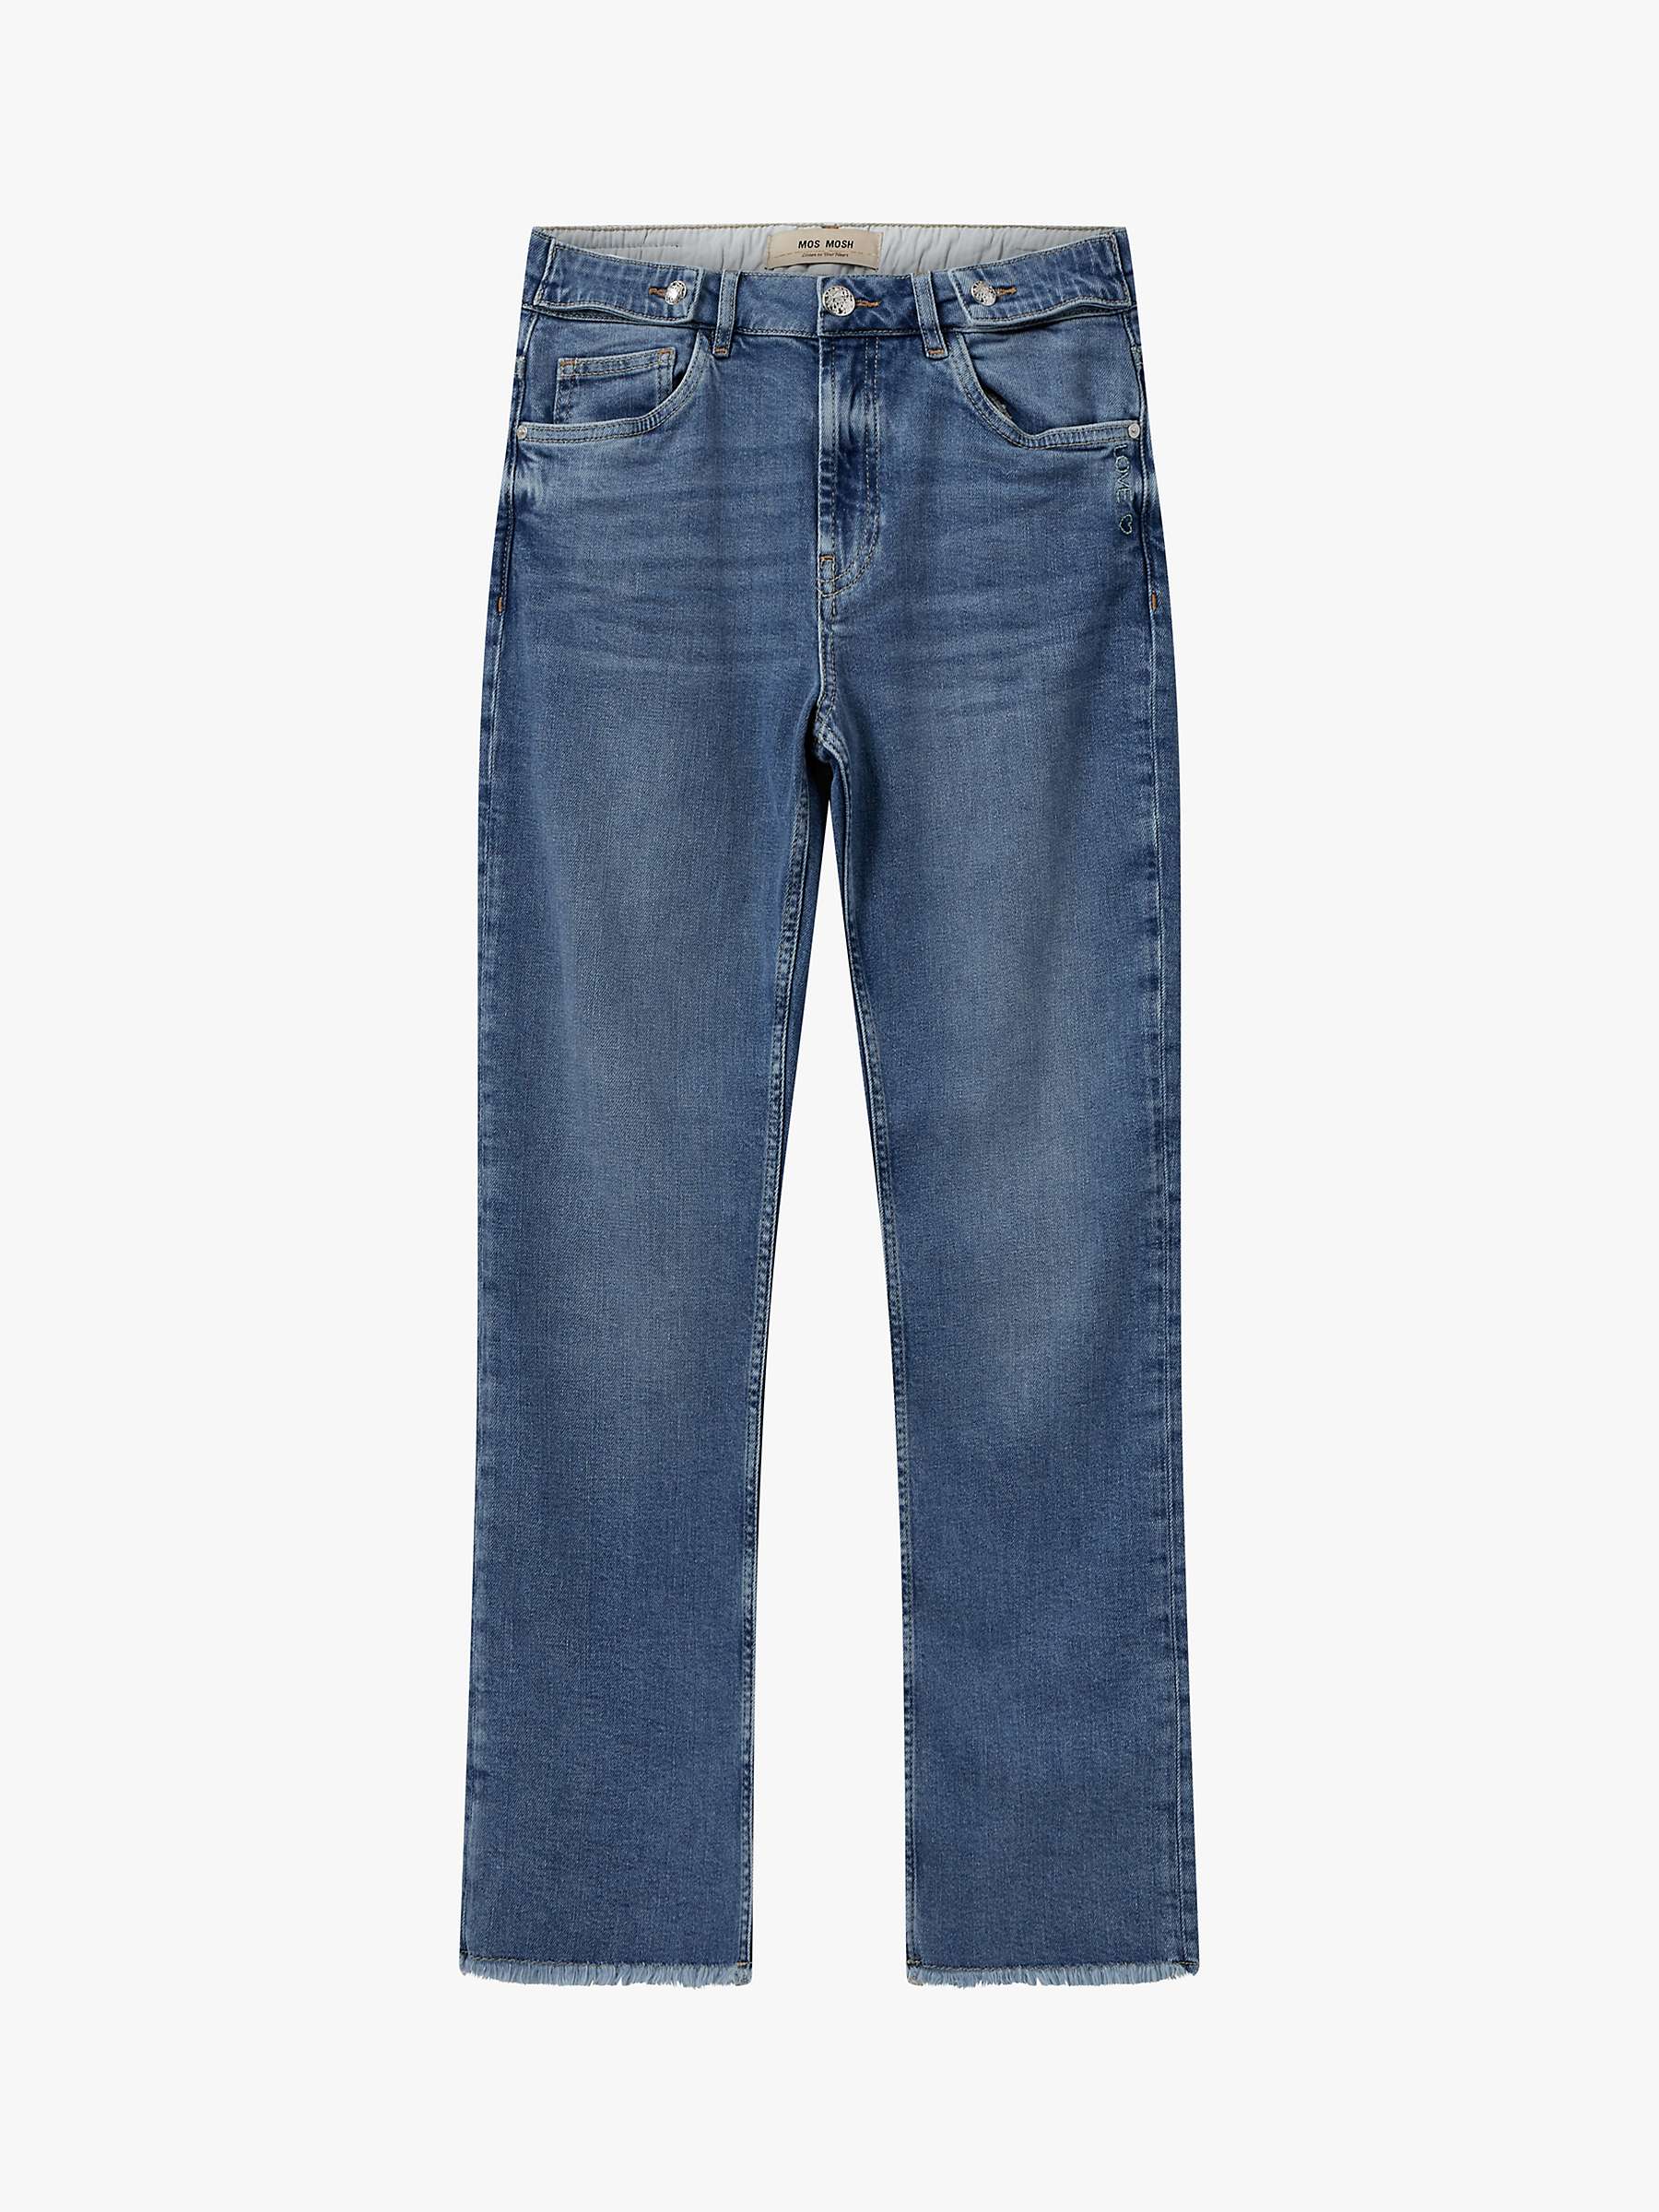 Buy MOS MOSH Ashley Mateos Flared Jeans, Blue Online at johnlewis.com